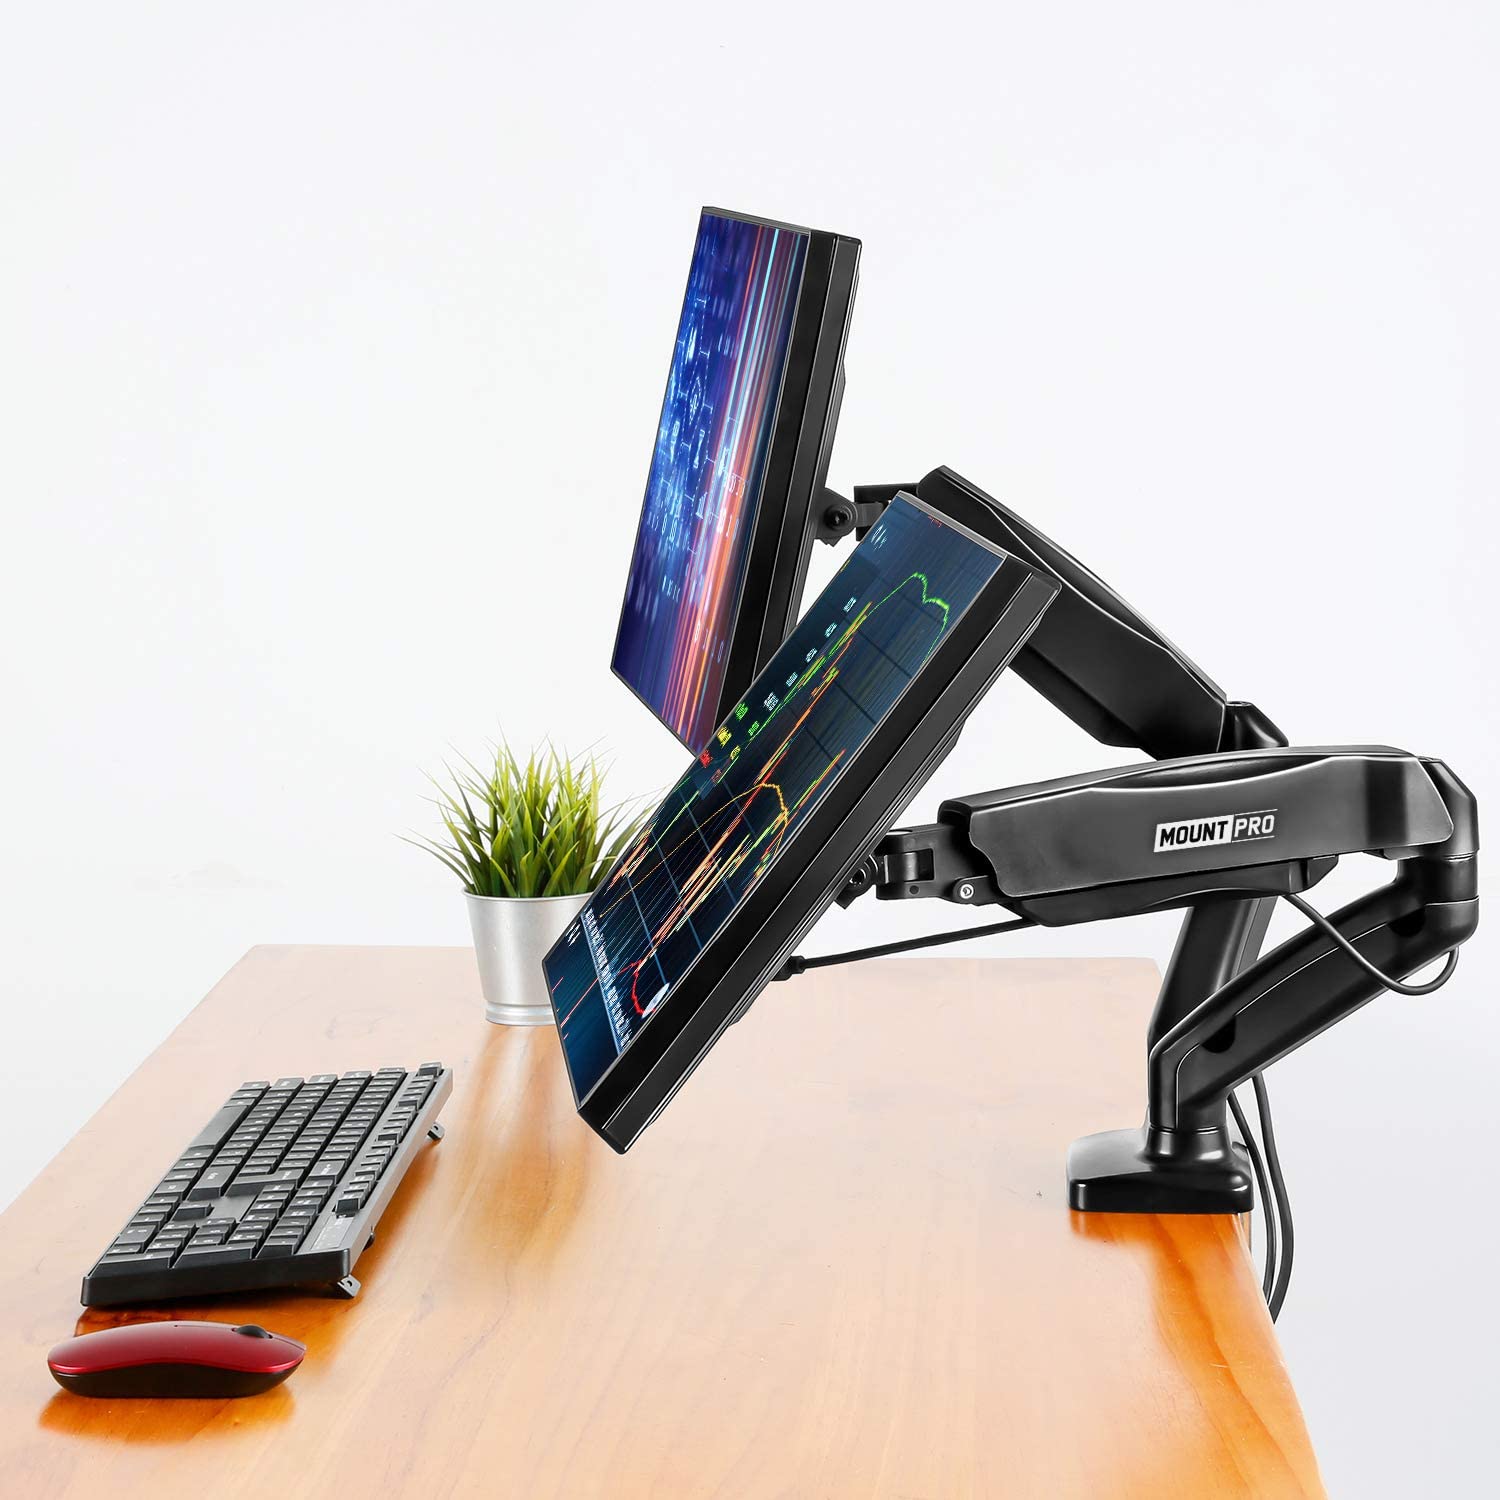 Dual Arms monitor arm for mounting 2 monitors